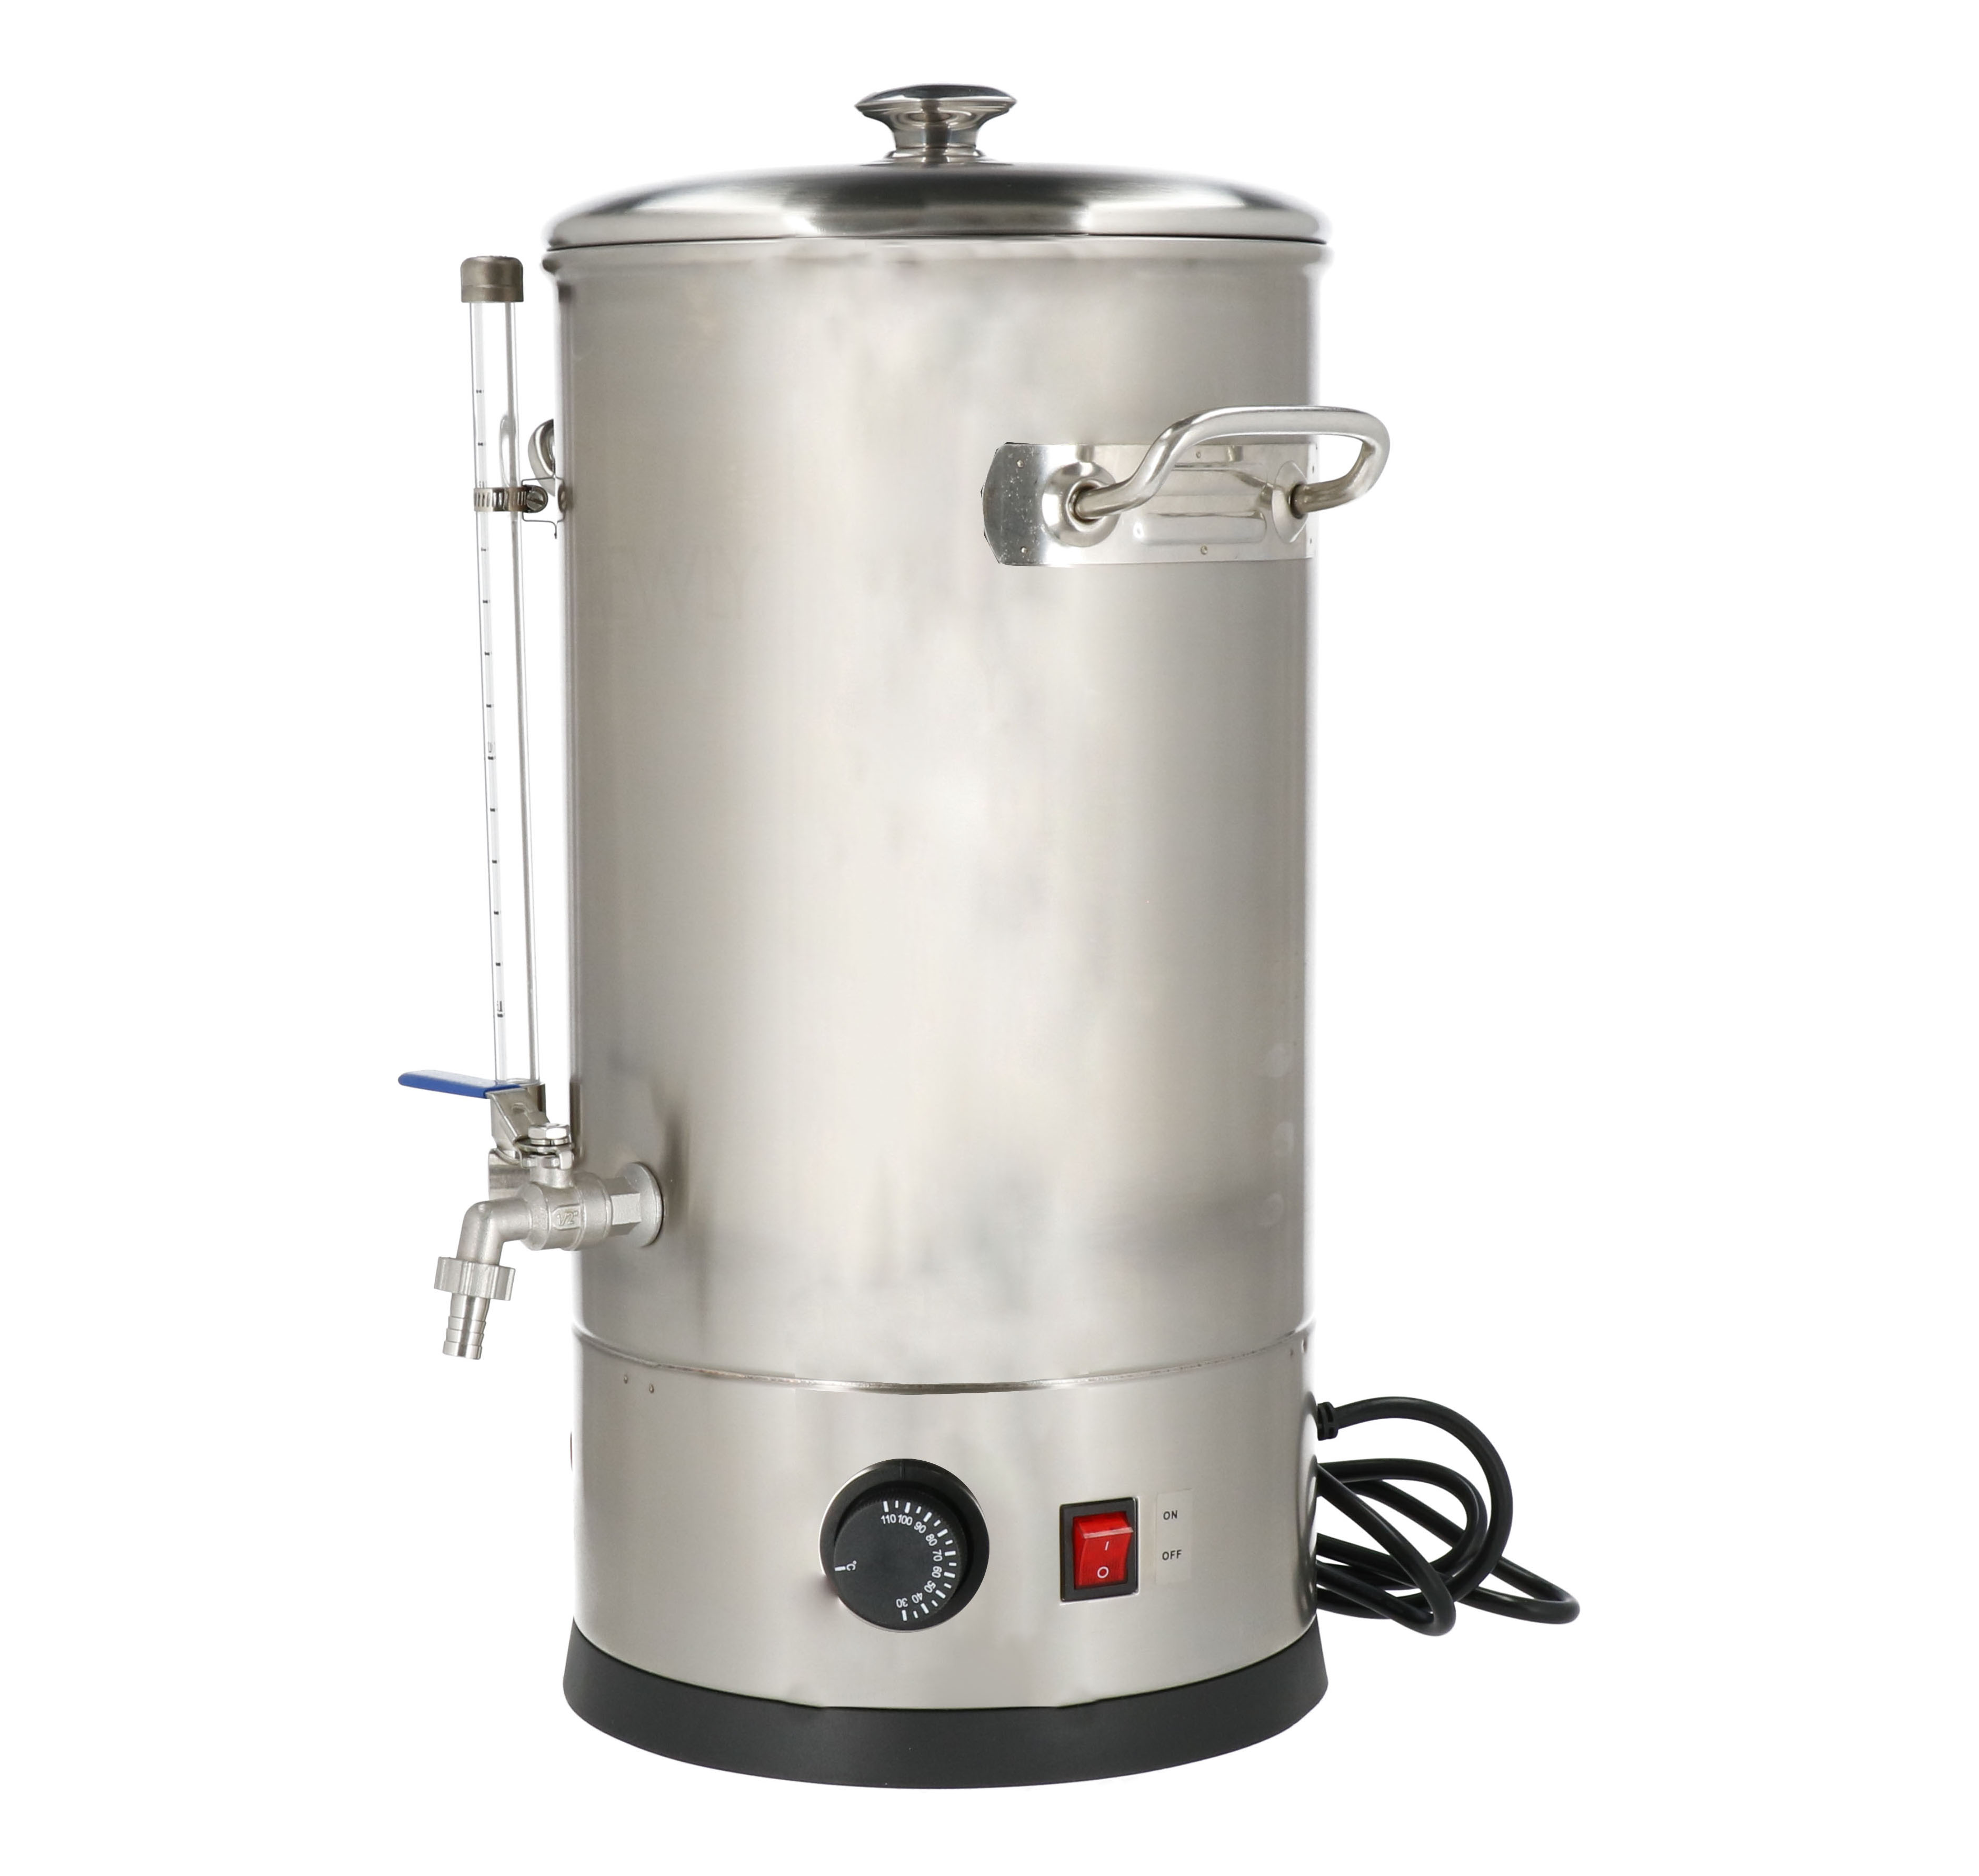 Easybrew Sparge water heater